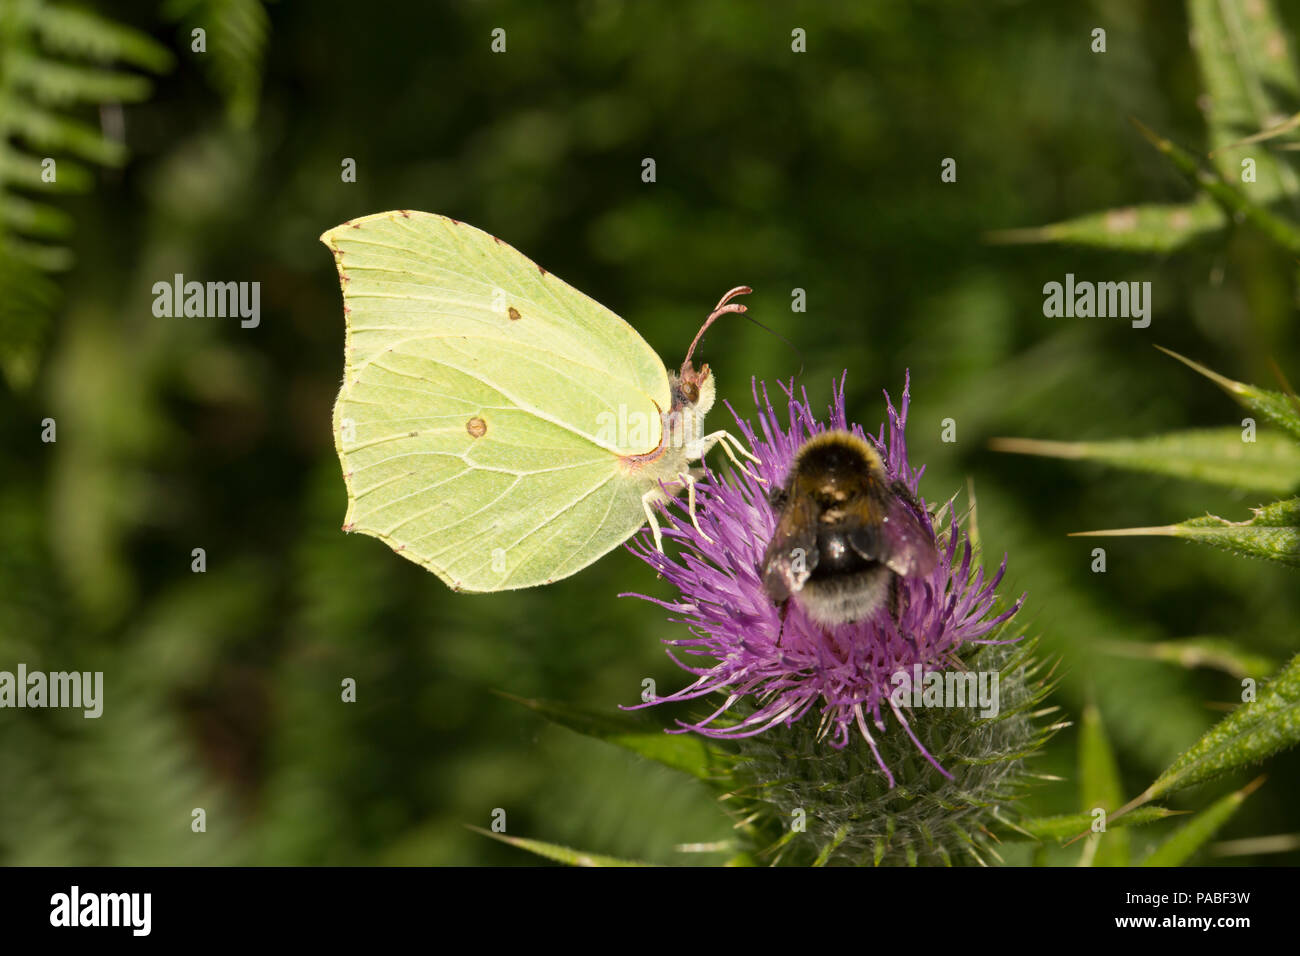 A Brimstone butterfly, Gonepteryx rhamni, and a bumblebee feeding on a flower on a hot day during the UK 2018 heatwave. Dorset England UK GB. 21.7.201 Stock Photo